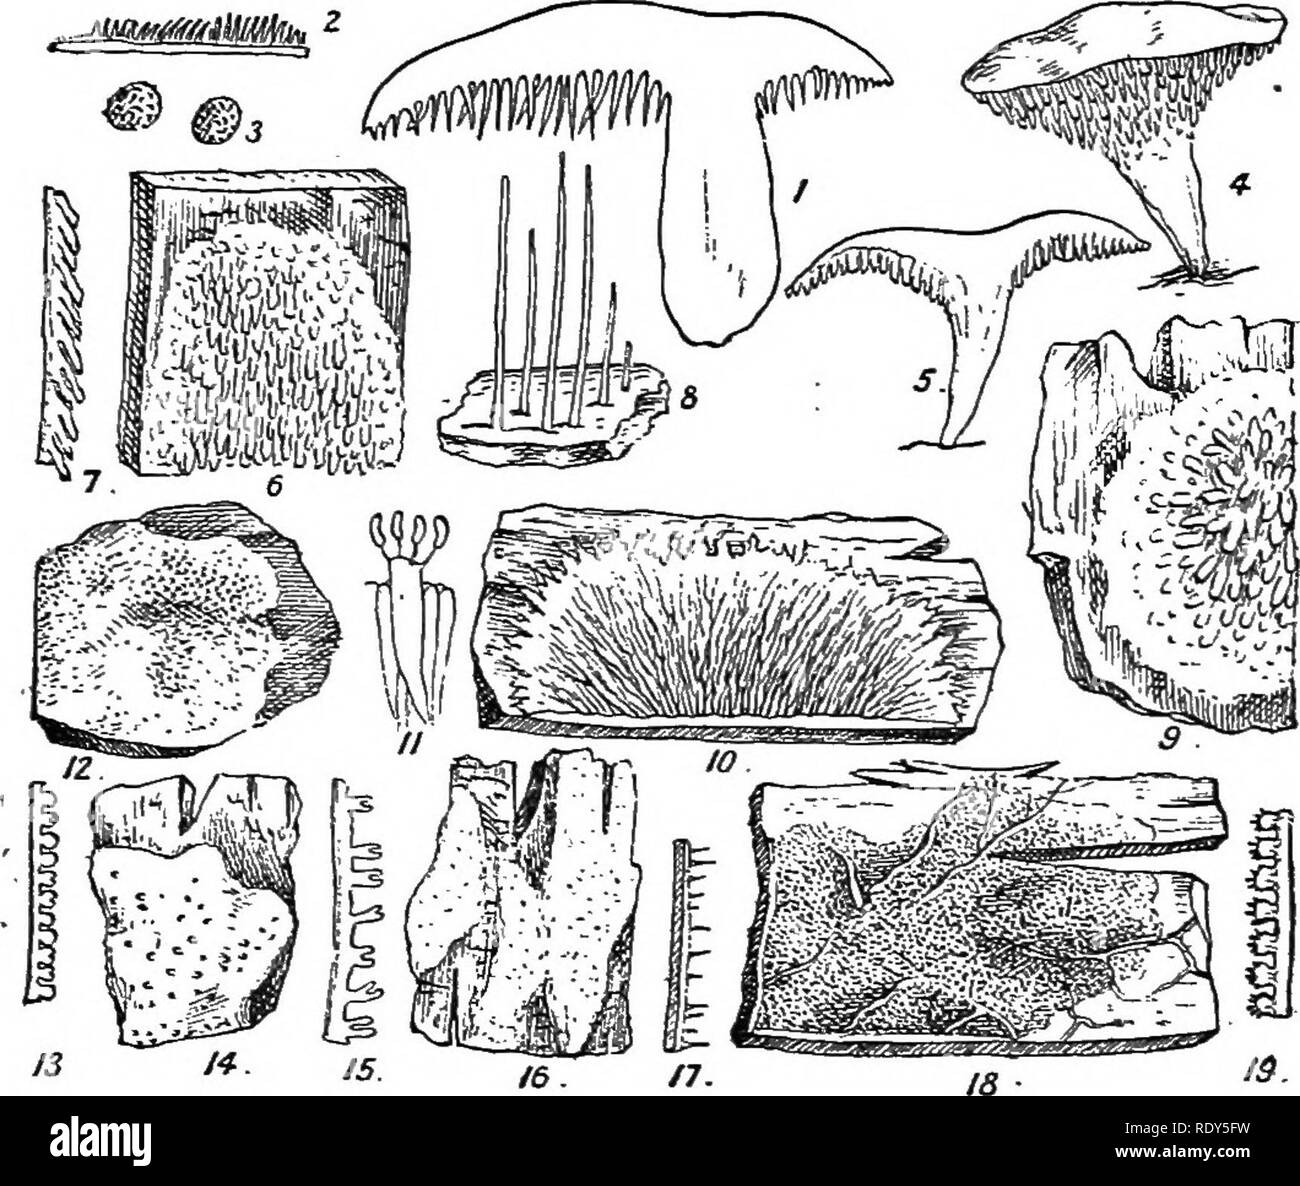 . British fungus-flora. A classified text-book of mycology. Fungi. HYDNTTM. 14a. FIGUKES ILLUSTRATING THE HYDXEAE. Fig. 1, Hydnum repandum, section through the entire fungus, shomng the inferior hymenium, consisting of subulate spines; stem excentric ; half nat. size;—Fig. 2, Hydnum aureum, section showing the superior hymenium in a resupinate species; nat. size;—Fig. 3, Caldesiella ferrugi- nosa, spores, highly mag.;—Fig. 4, SUtotrema confluens, single specimen, showing the more or less jagged plate-like teeth ;—Fig. 5, Section of same, nat. size;—Fig. 6, Irpex obUquus, portion of specimen; n Stock Photo